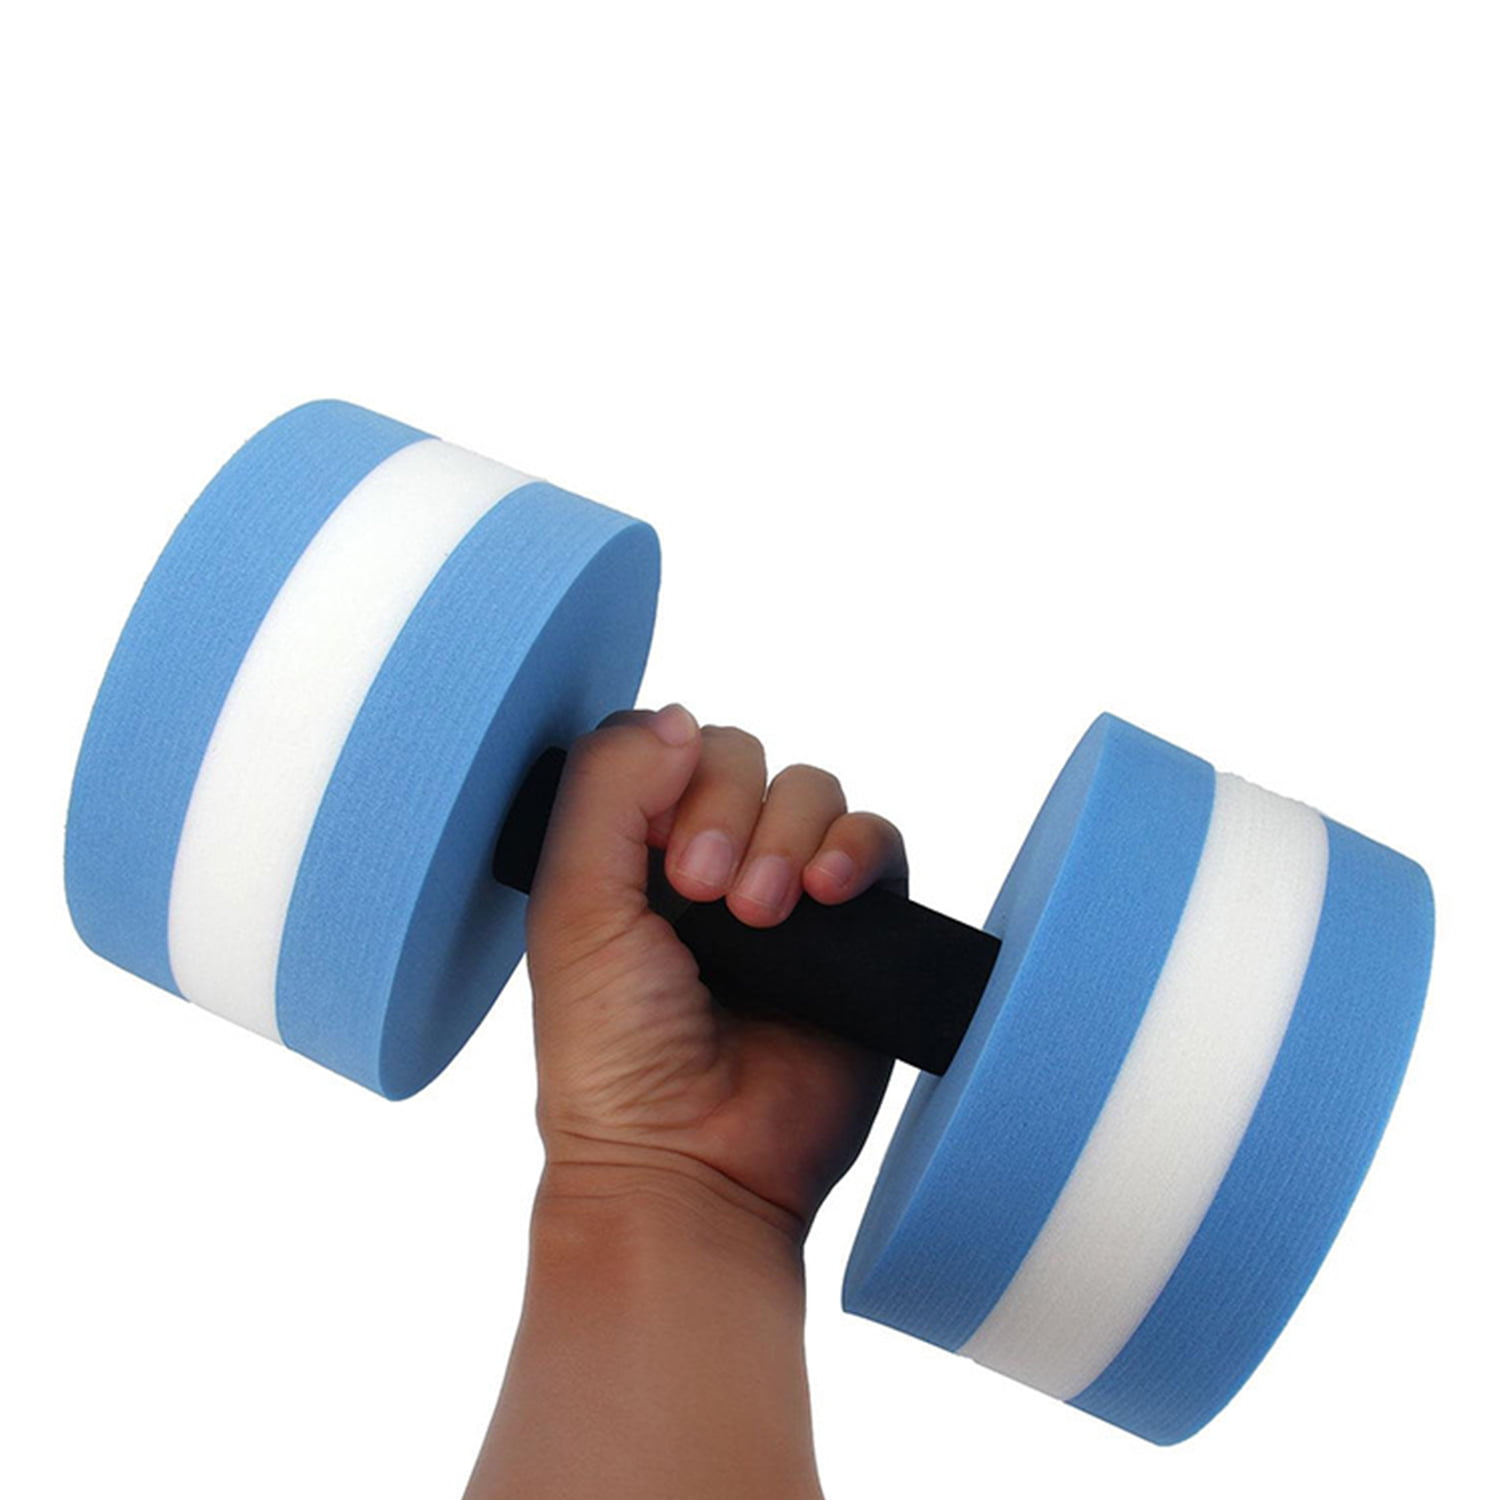 POPETPOP Aquatic Exercise Dumbbell EVA Foam Dumbbell Water Weight Barbells for Pool Sports Fitness Water Exercises 